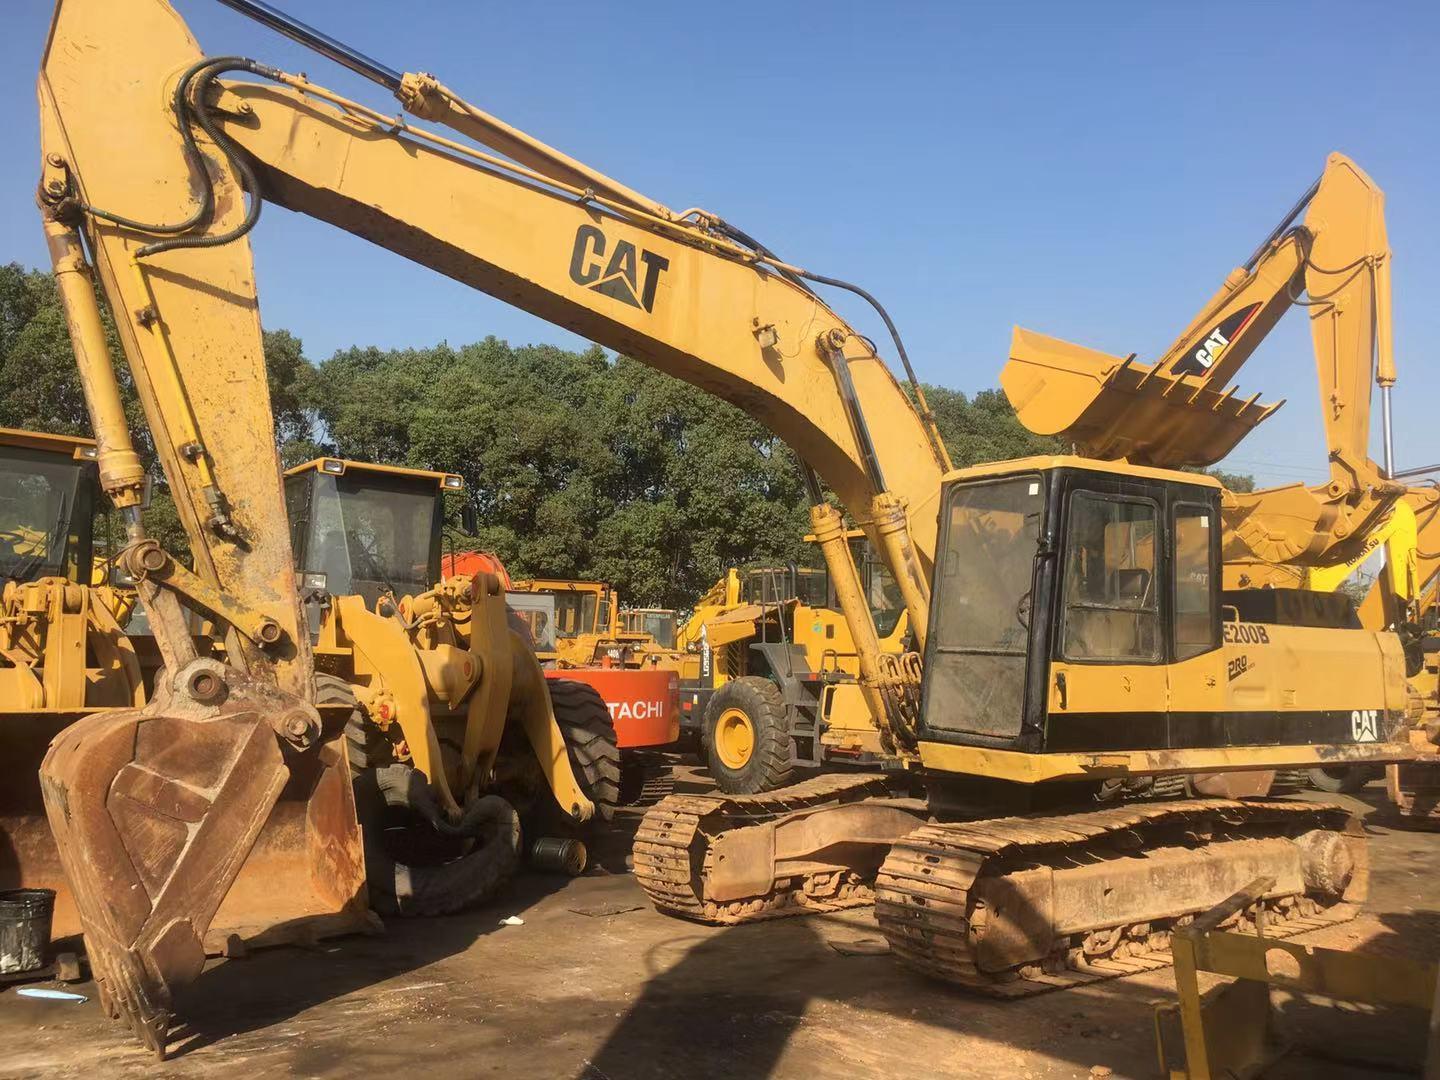 Used Original Japan Cat E200b Excavator with High Quality in Low Price for Hot Sale